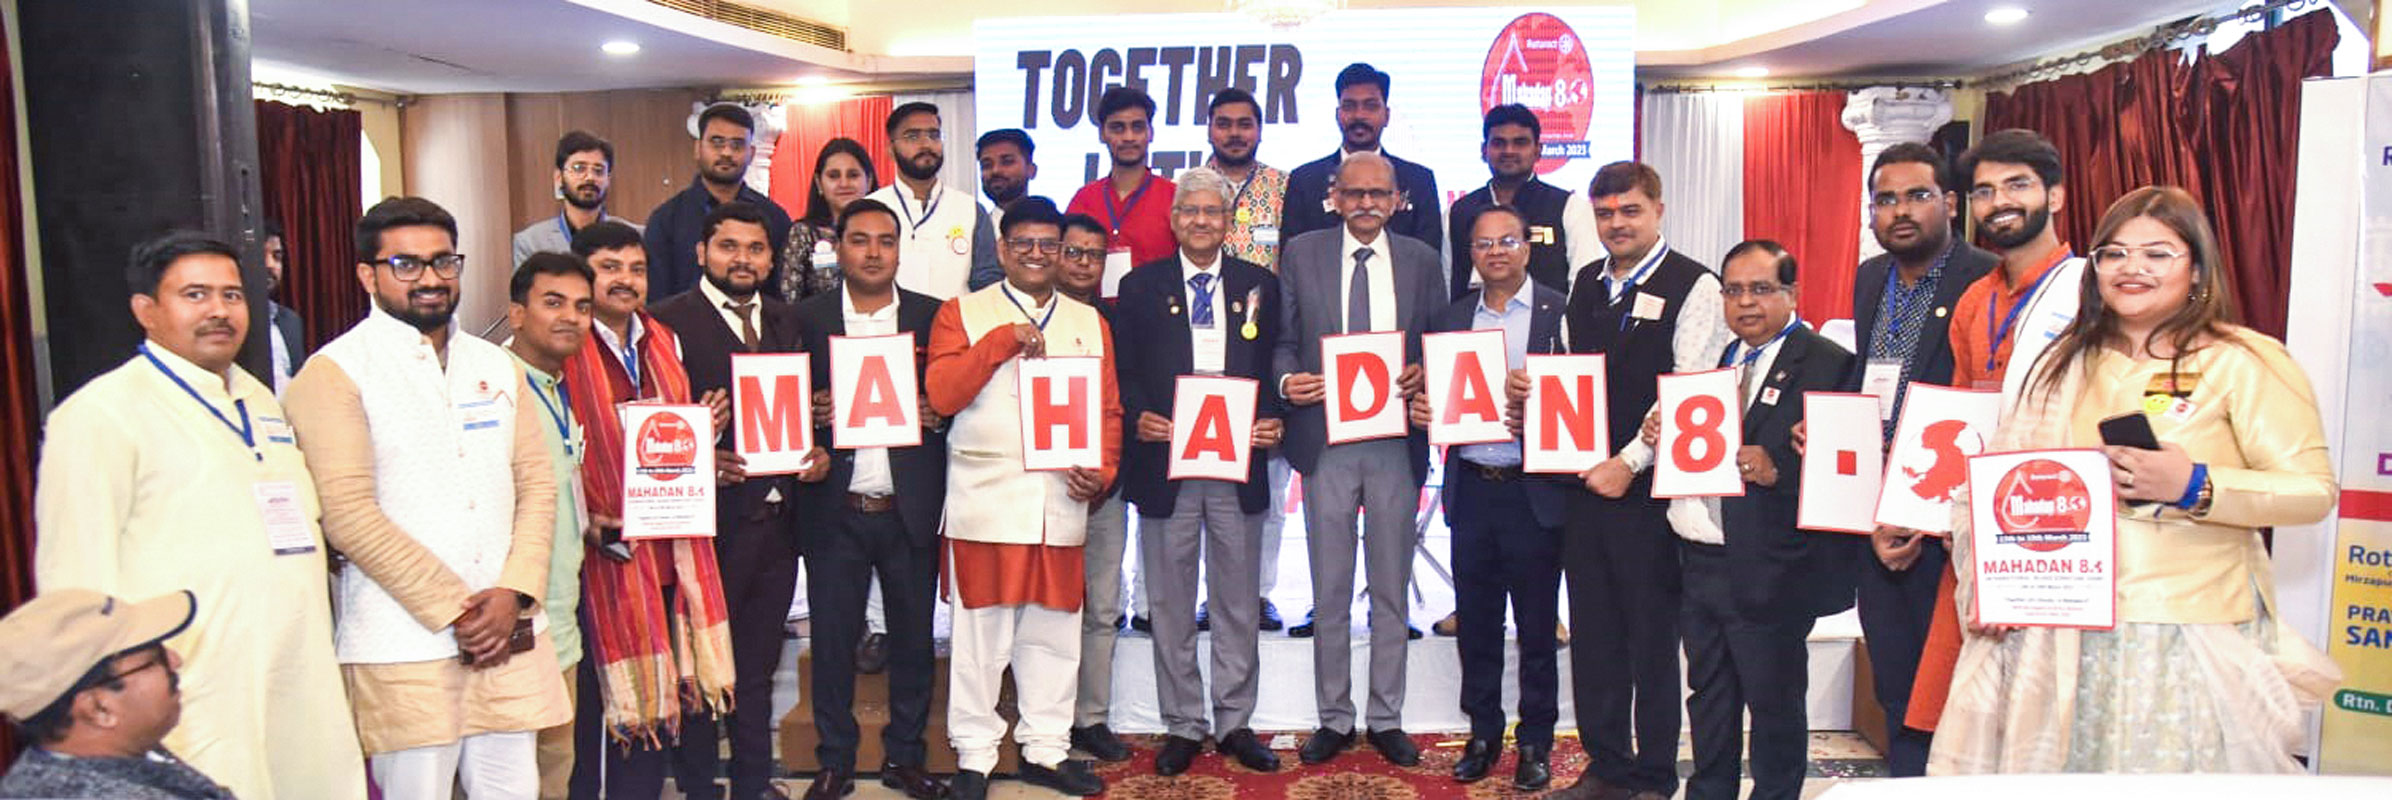 DG Anil Agarwal, district blood donation chairman Ajay Saxena and Rotaract chairman Bhuwalka with Rotaractors at the launch of Mahadan 8.0 website and anthem.